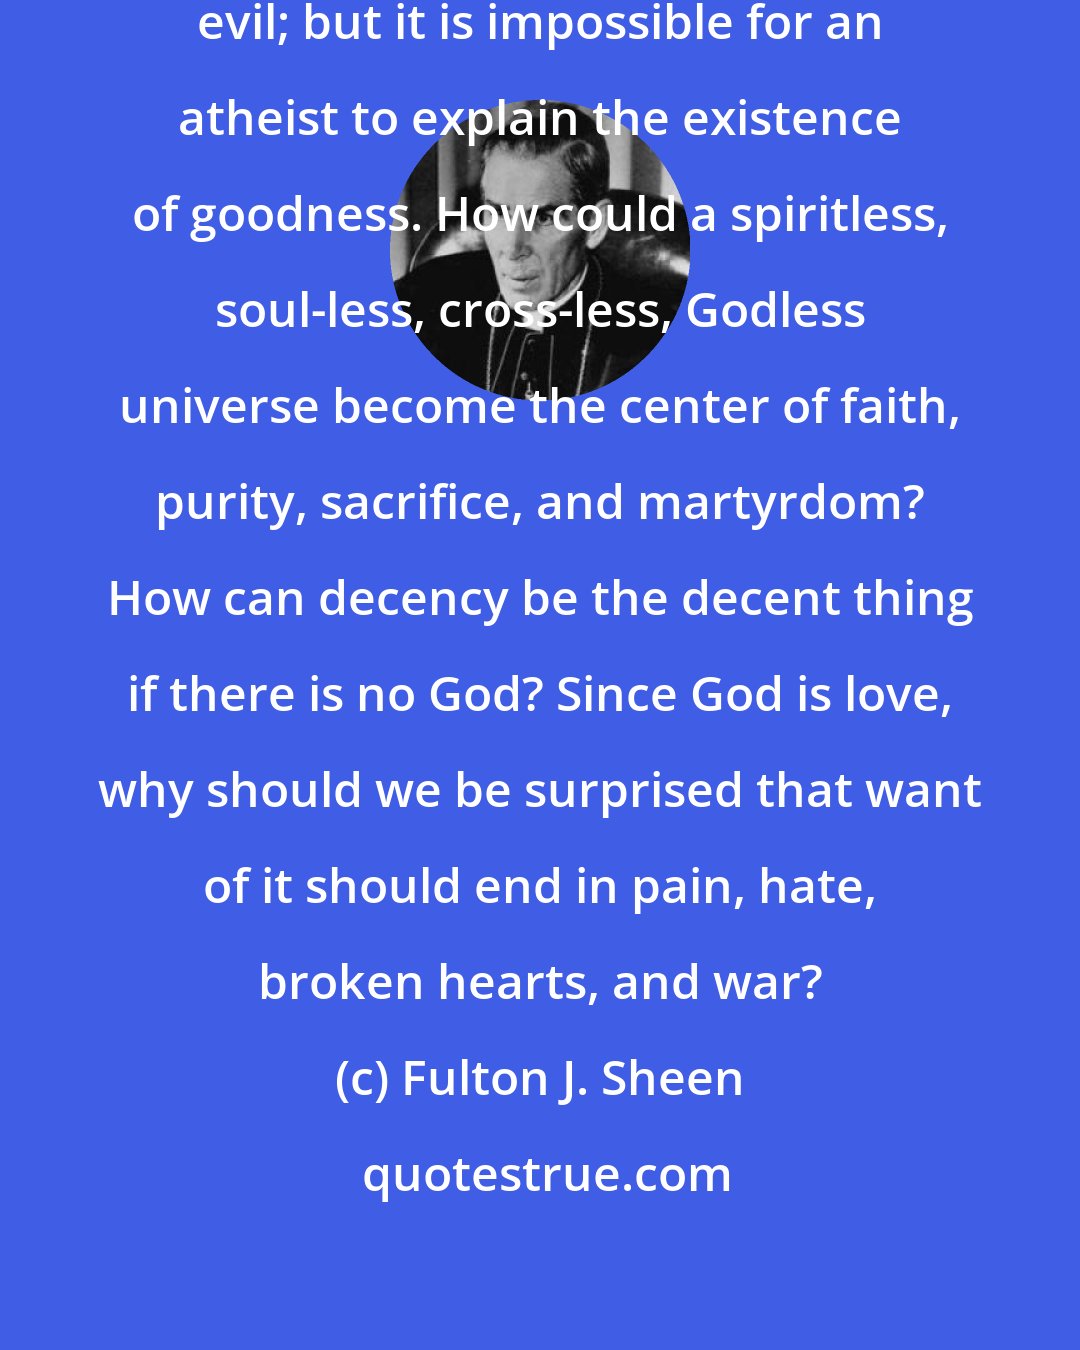 Fulton J. Sheen: It is not easy to explain why God permits evil; but it is impossible for an atheist to explain the existence of goodness. How could a spiritless, soul-less, cross-less, Godless universe become the center of faith, purity, sacrifice, and martyrdom? How can decency be the decent thing if there is no God? Since God is love, why should we be surprised that want of it should end in pain, hate, broken hearts, and war?